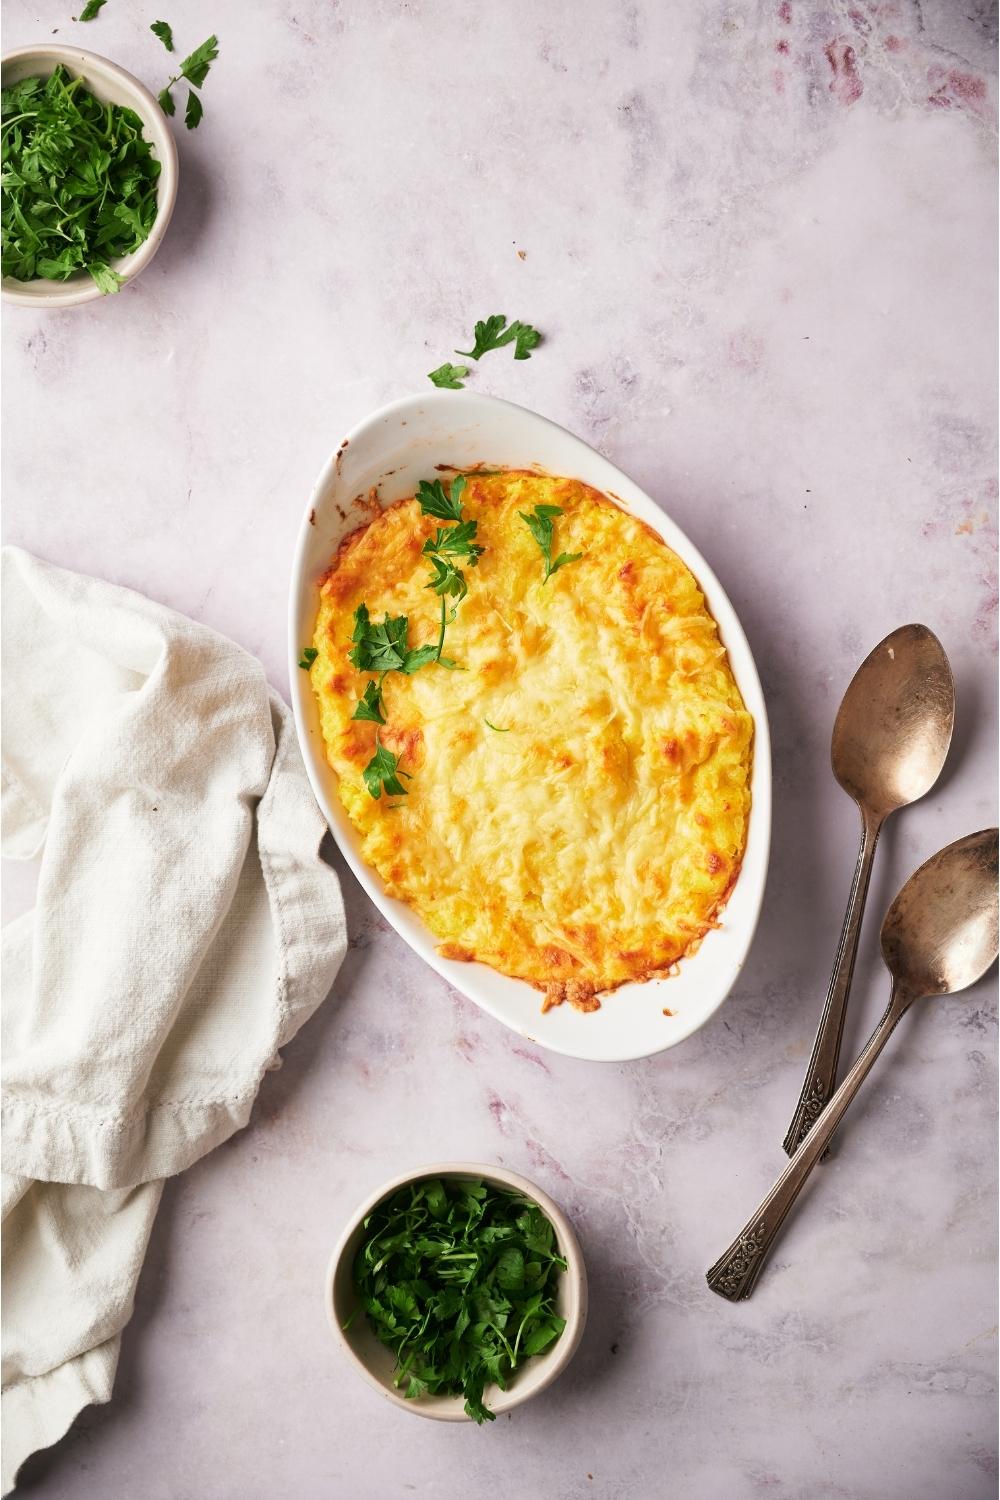 Paula Deen's corn casserole freshly baked next to two spoons and a bowl of fresh parsley